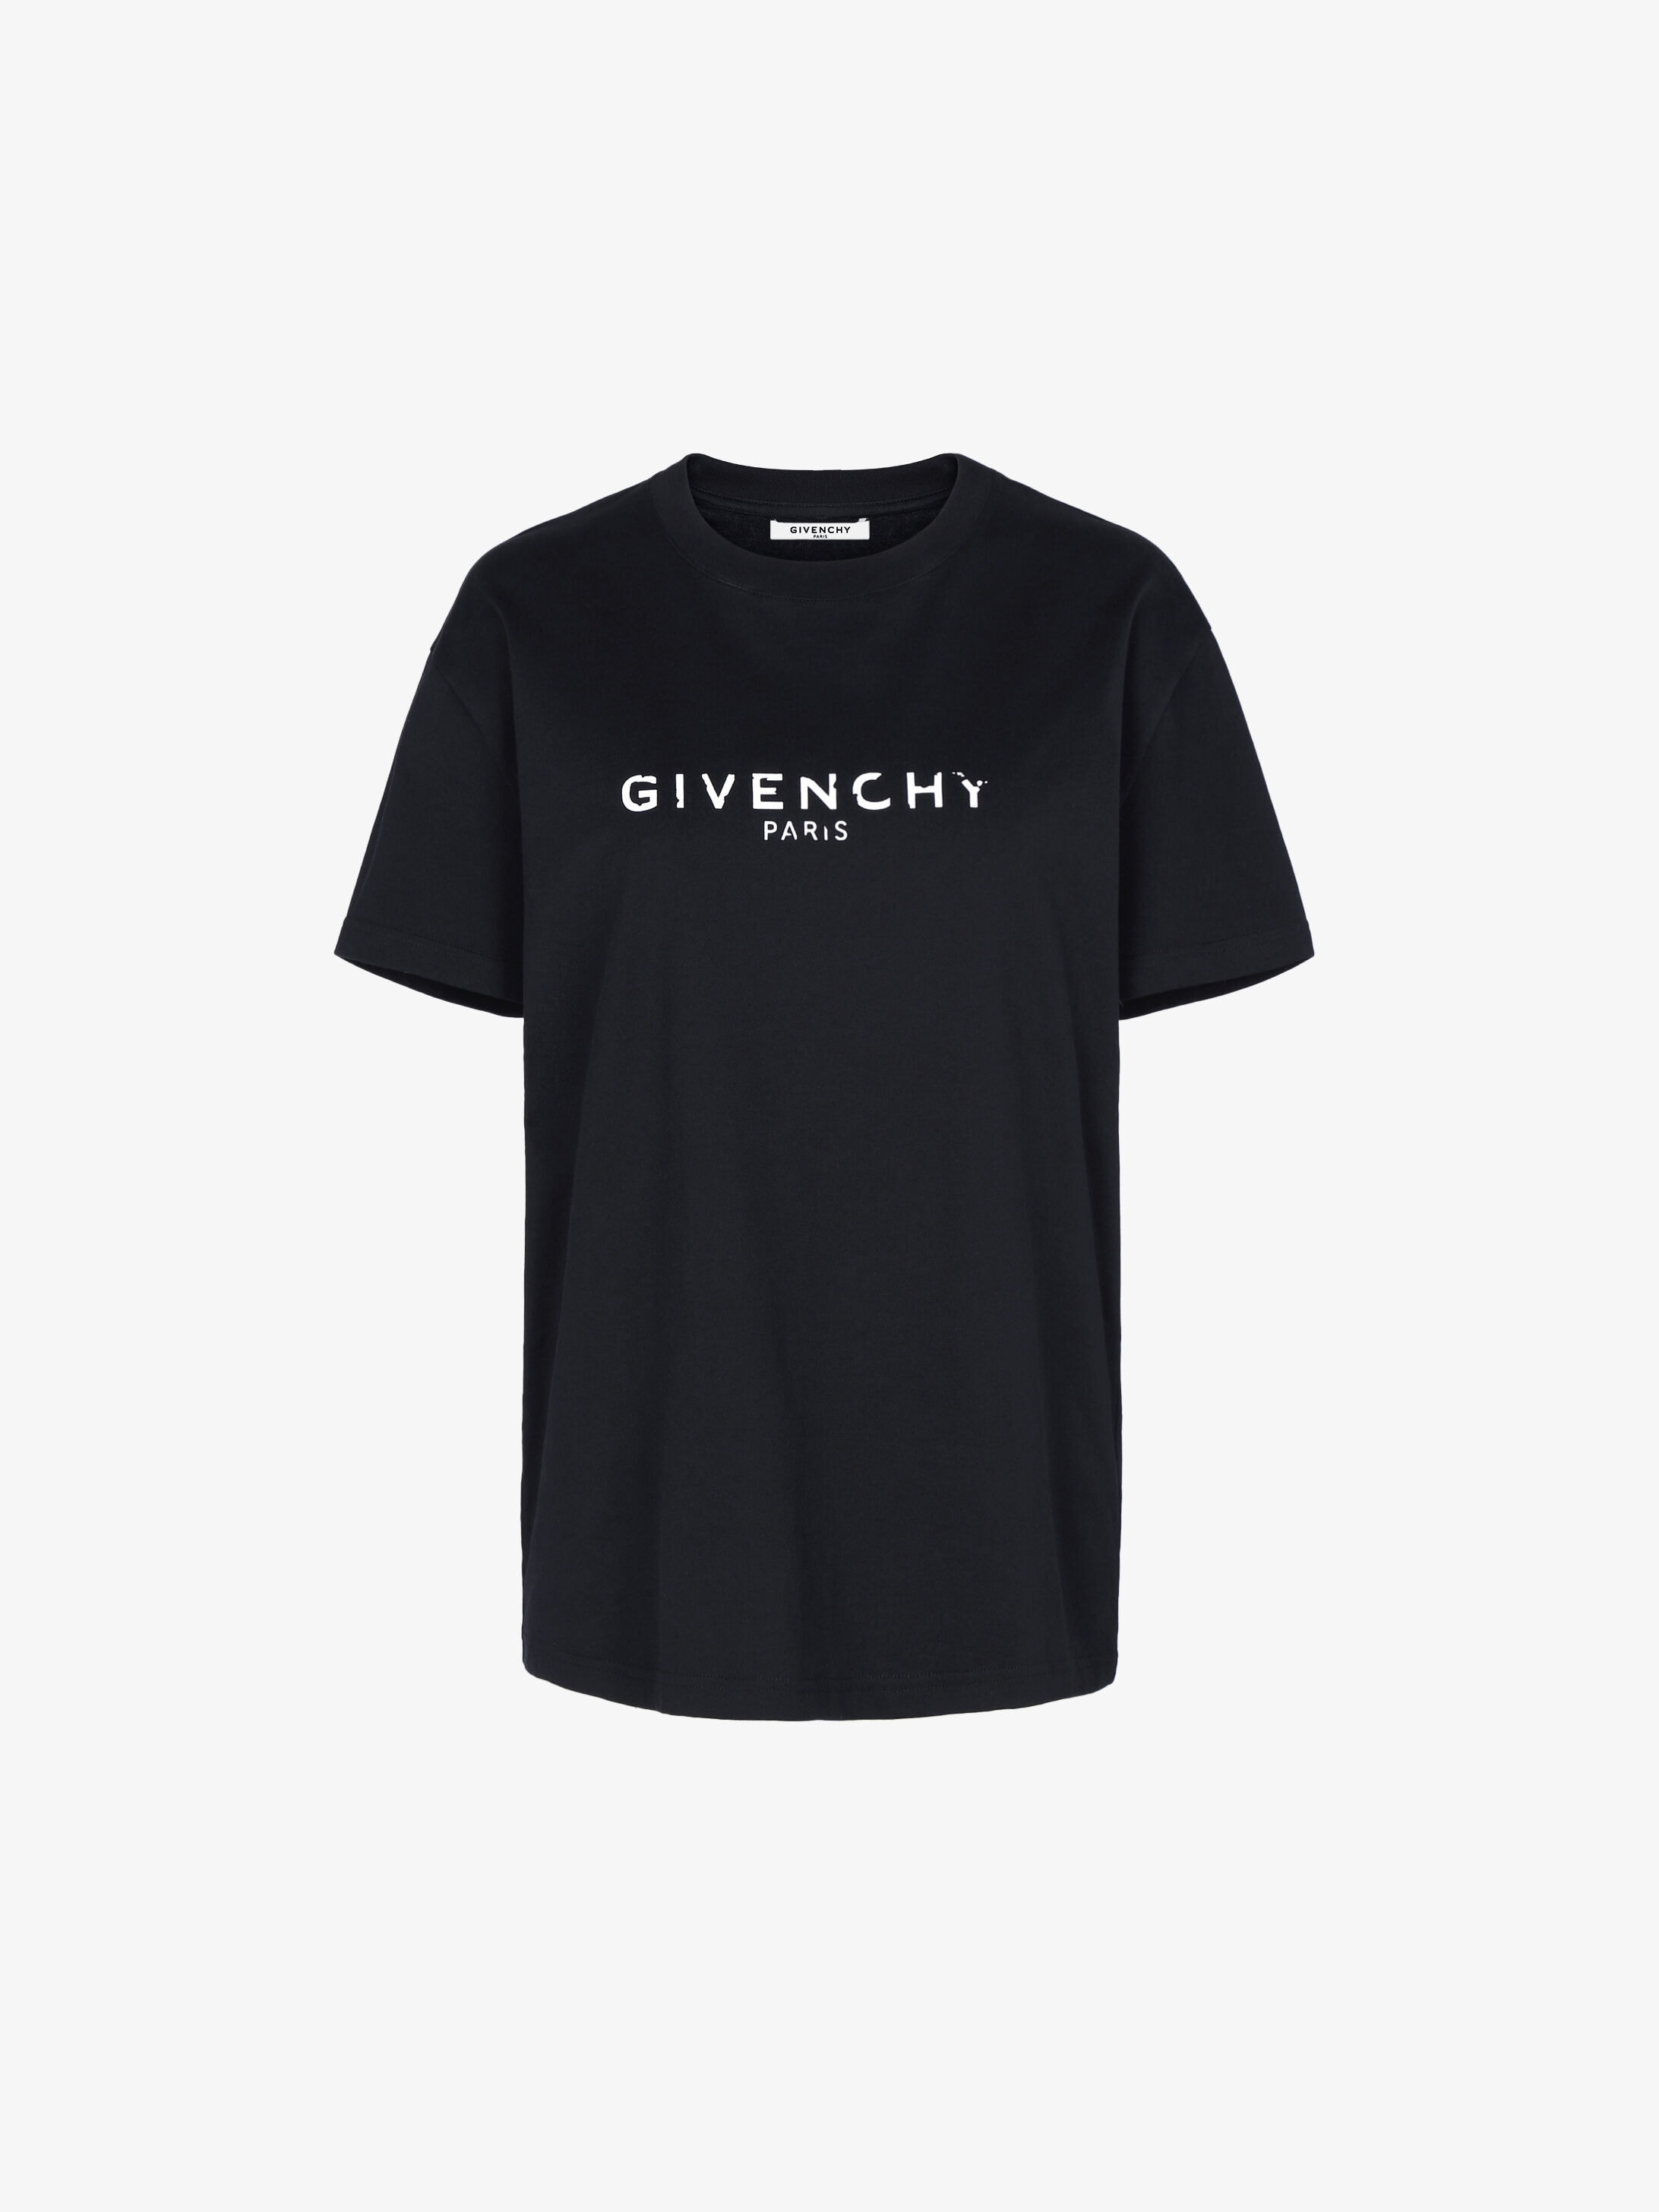 givenchy graphic tee